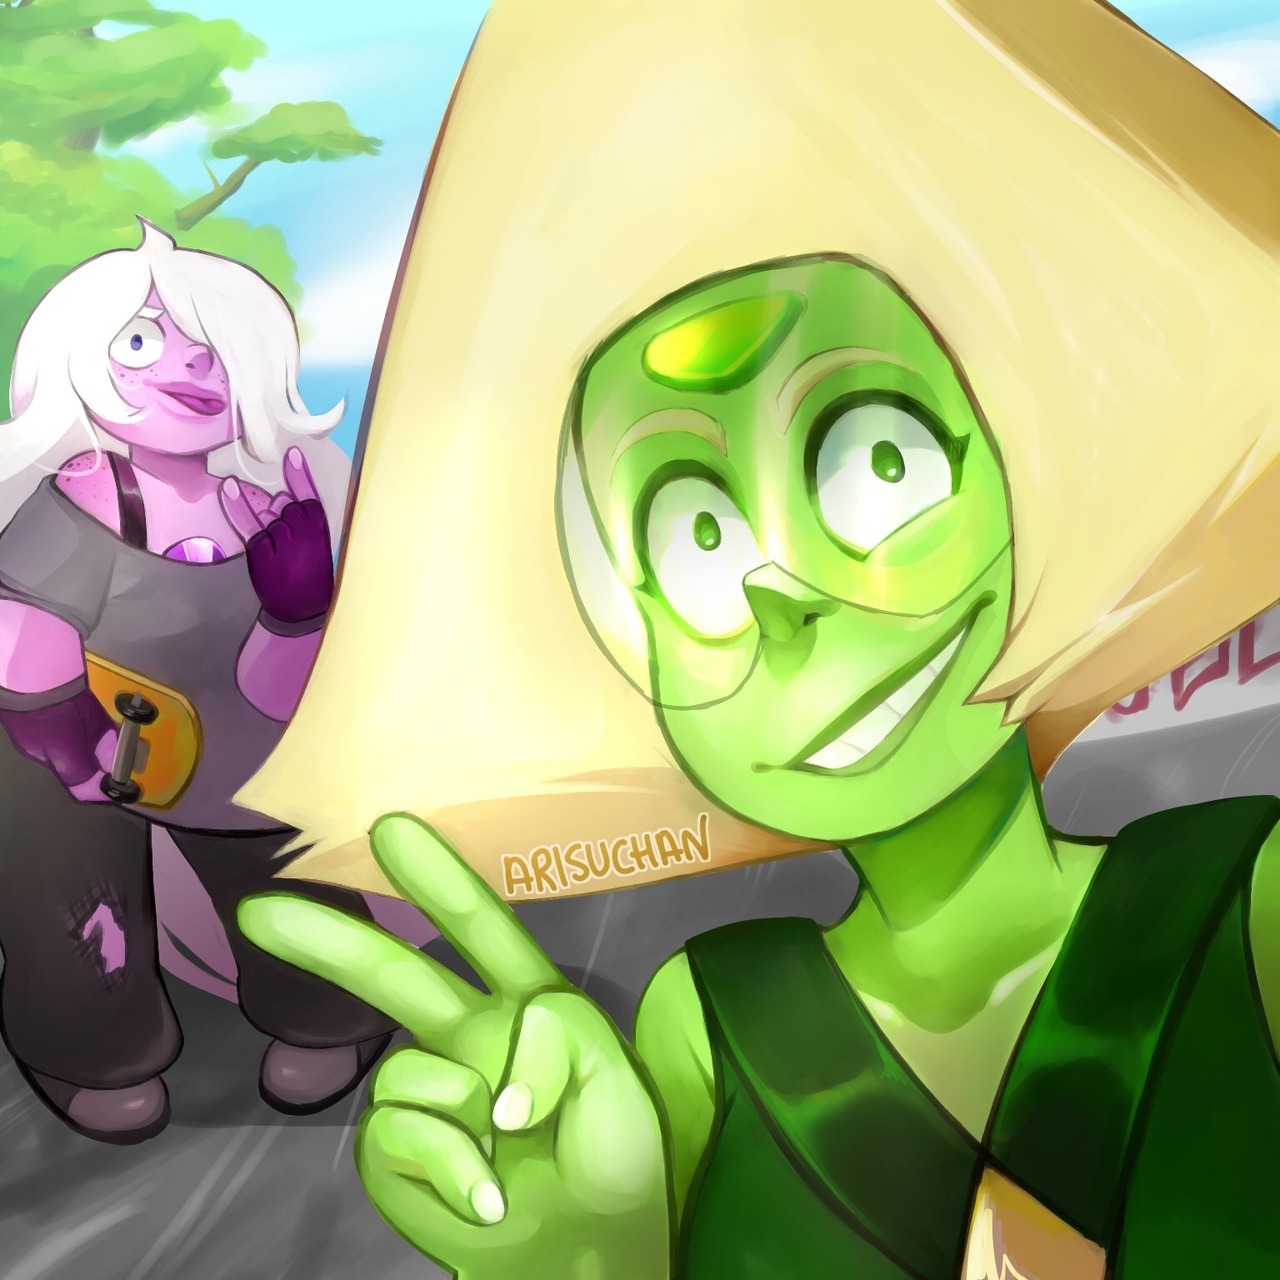 Amethyst took Peridot skateboarding. Peridot tried. She failed. But she took a lot of pics and it was a nice day. They had fun.